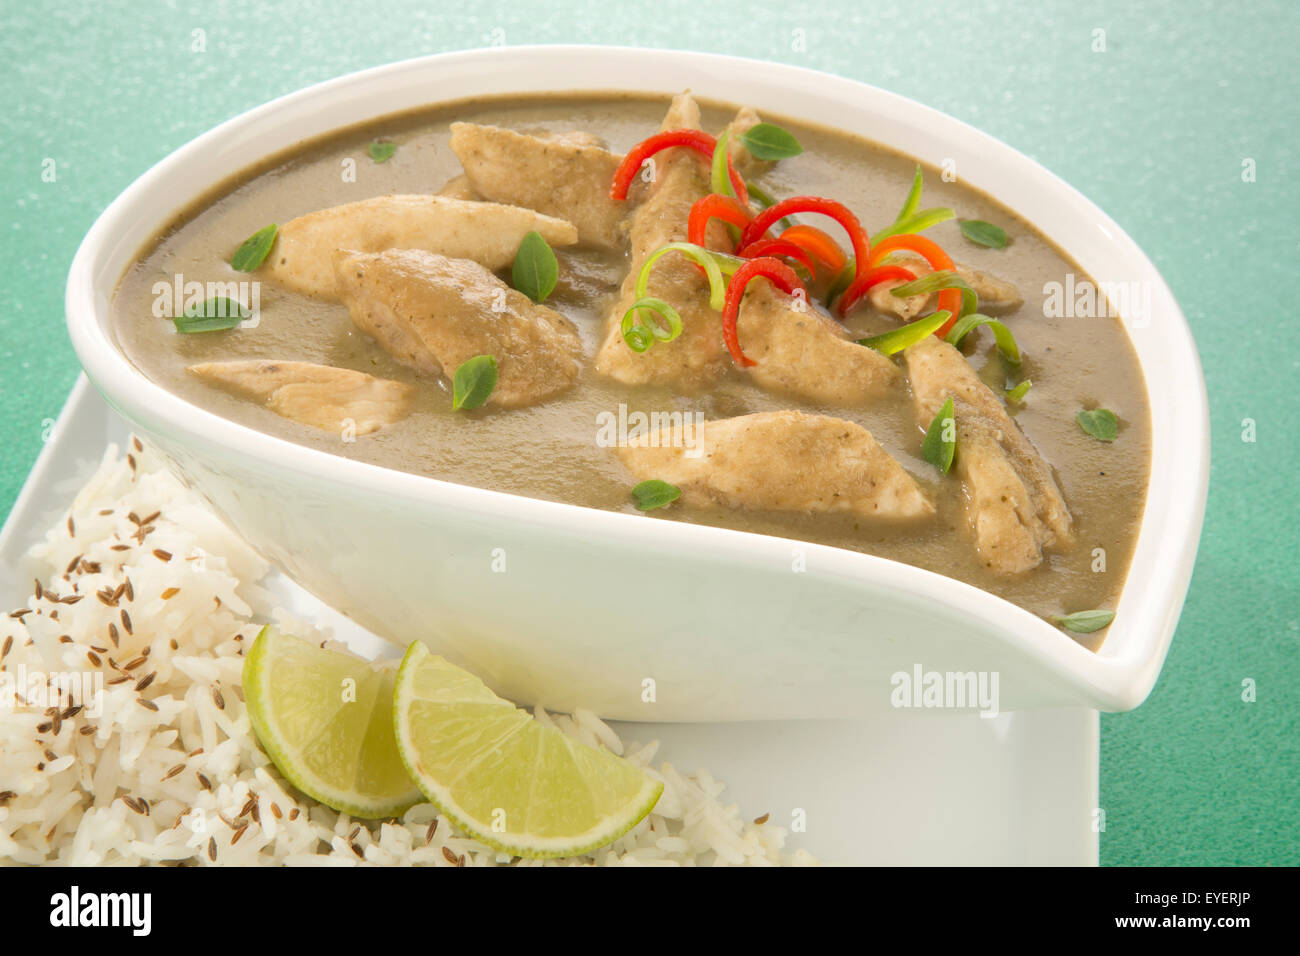 CURRY verde tailandese pasto Foto Stock